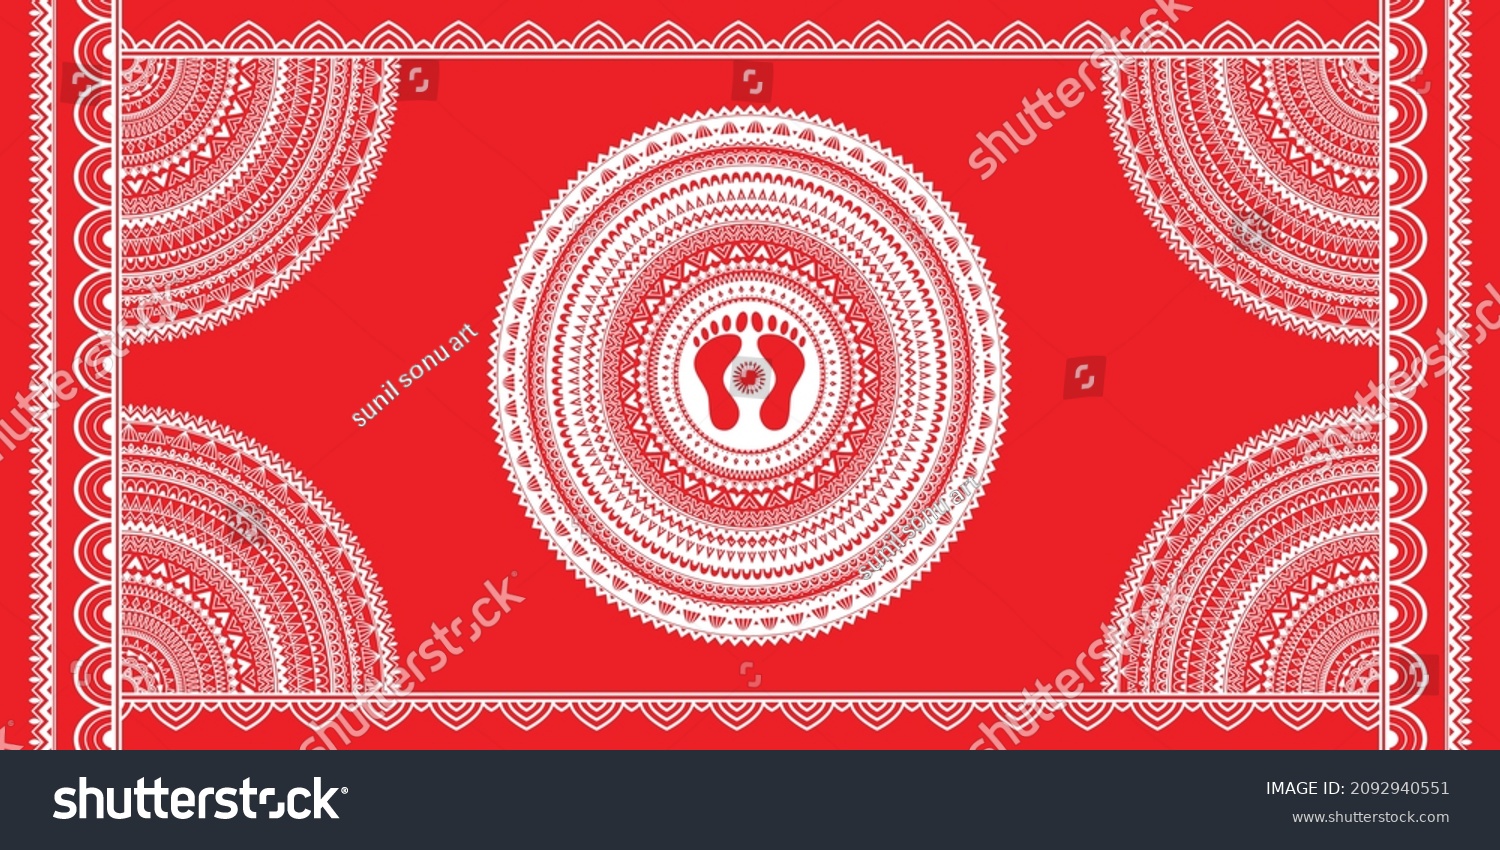 SVG of Aipan Design pattern for india festival vector red and white color
 svg